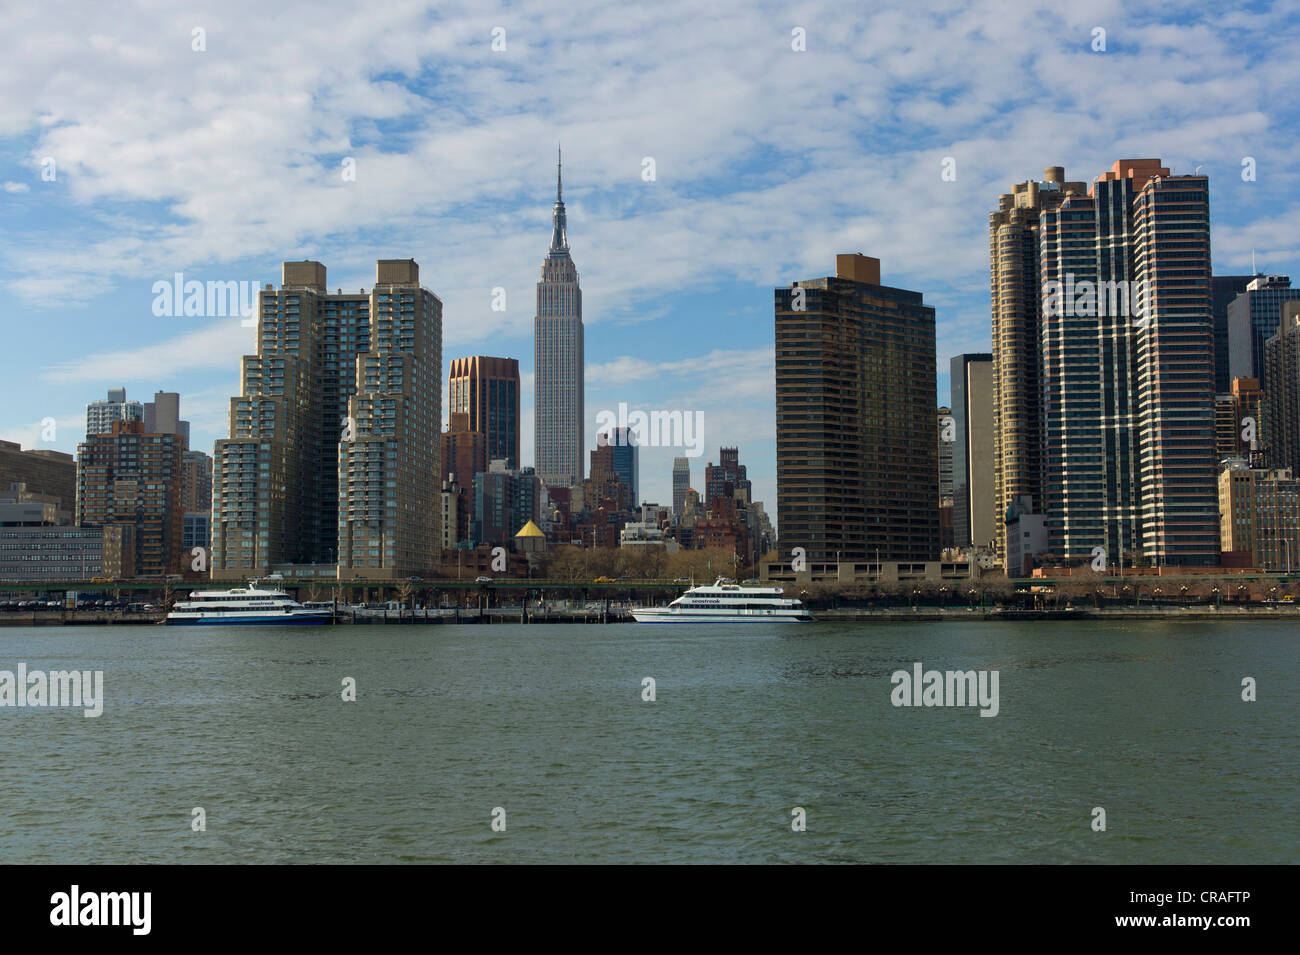 Skyline of New York, East River, the Empire State Building at back, Manhattan, New York USA Stock Photo